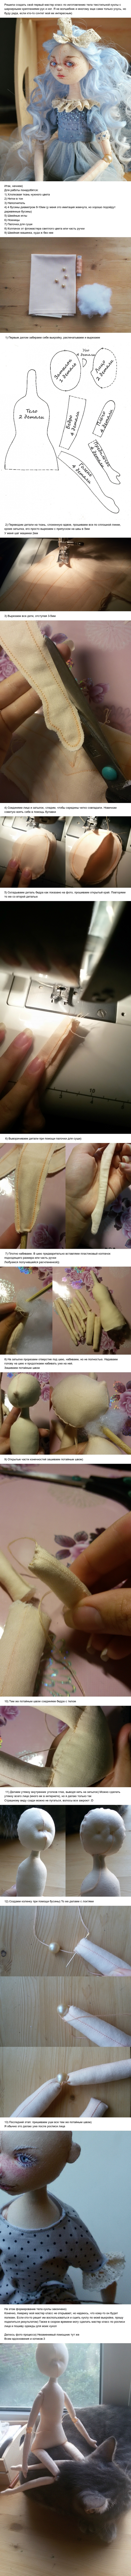 Master class of the body of a doll with articulated limbs + pattern - My, Doll, Creation, Master Class, Longpost, Toys, Handmade